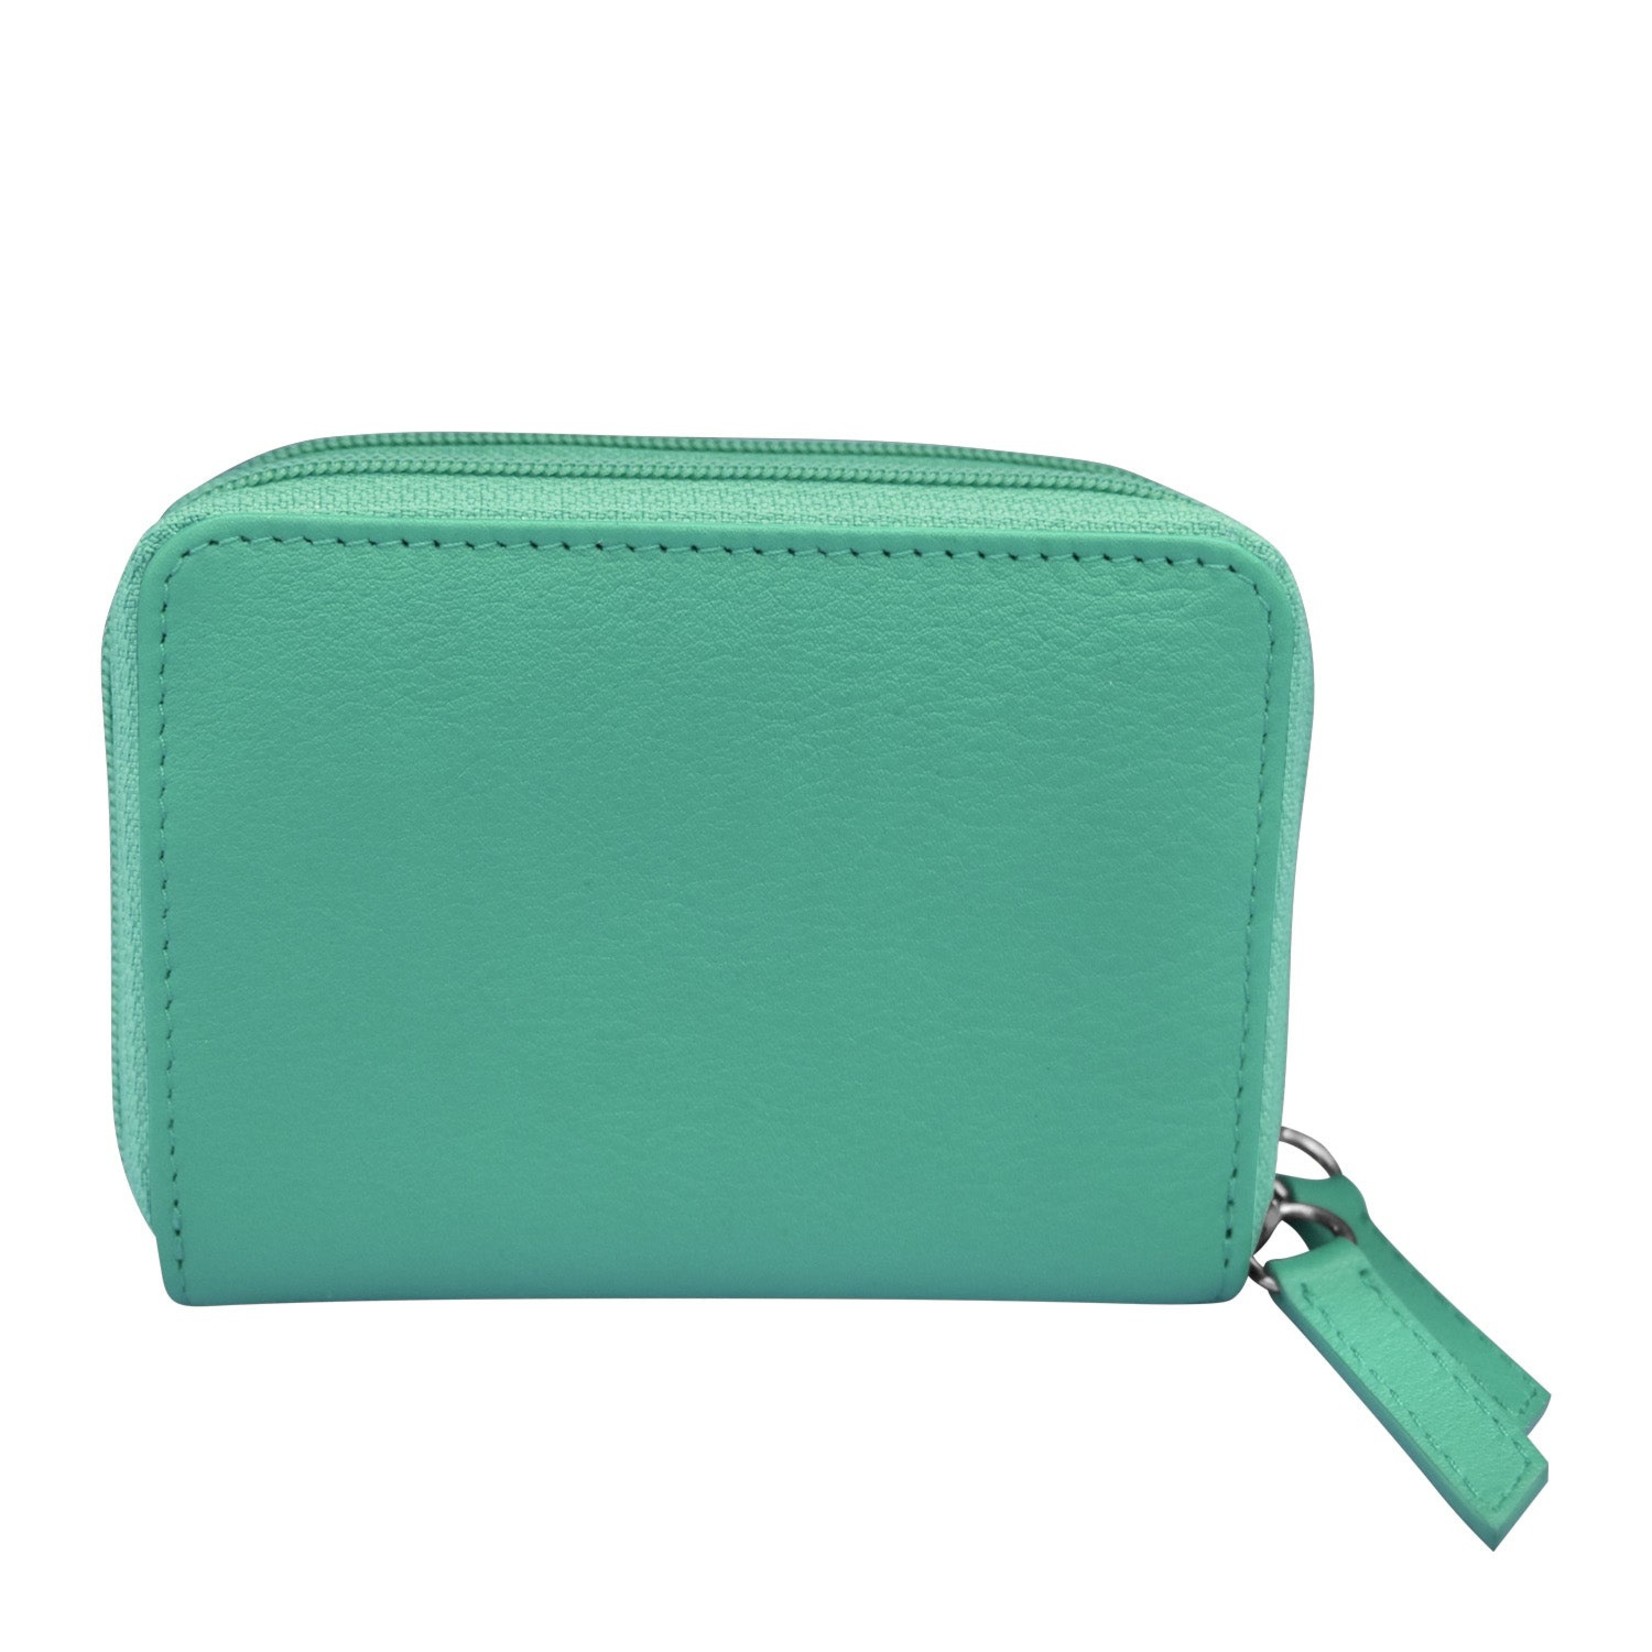 Leather Handbags and Accessories 6714 Turquoise - RFID Double Zip Accordion Card Holder